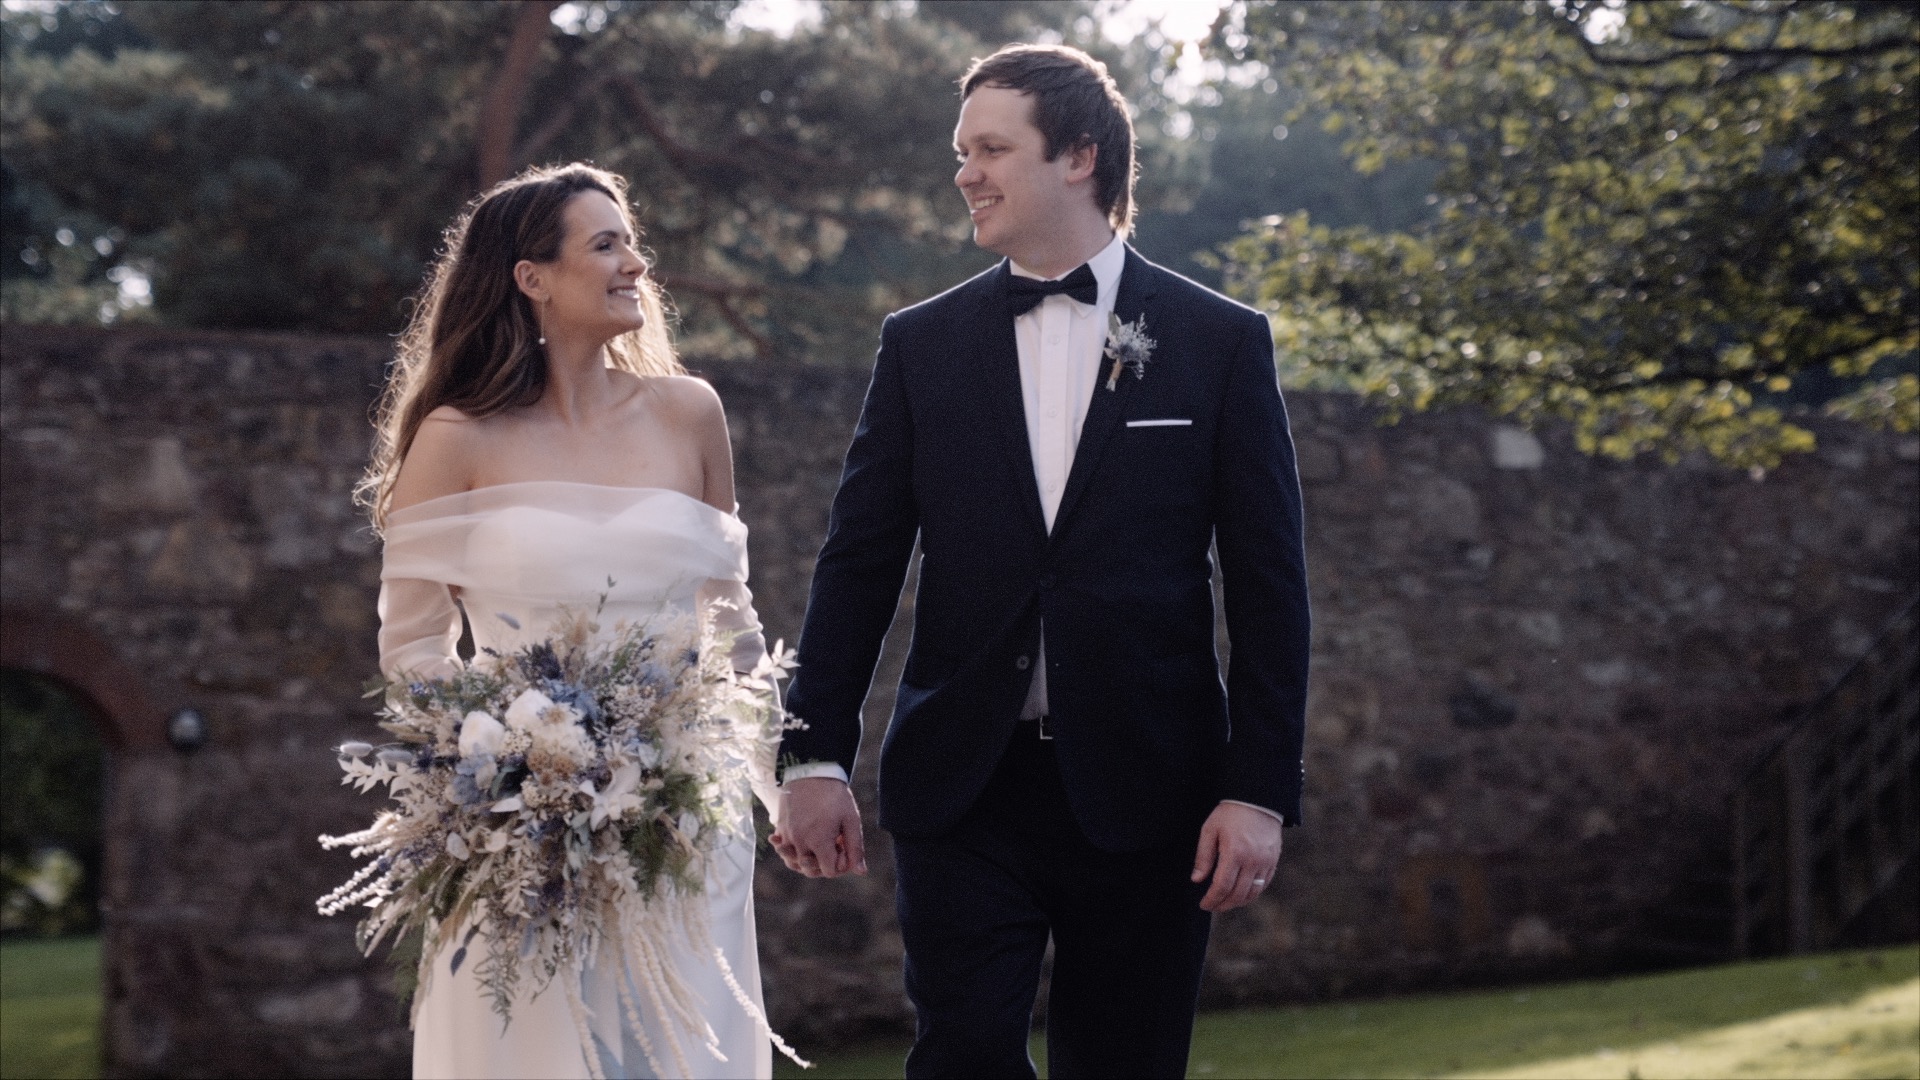 ro and andy walking together as bride and groom in a walled garden